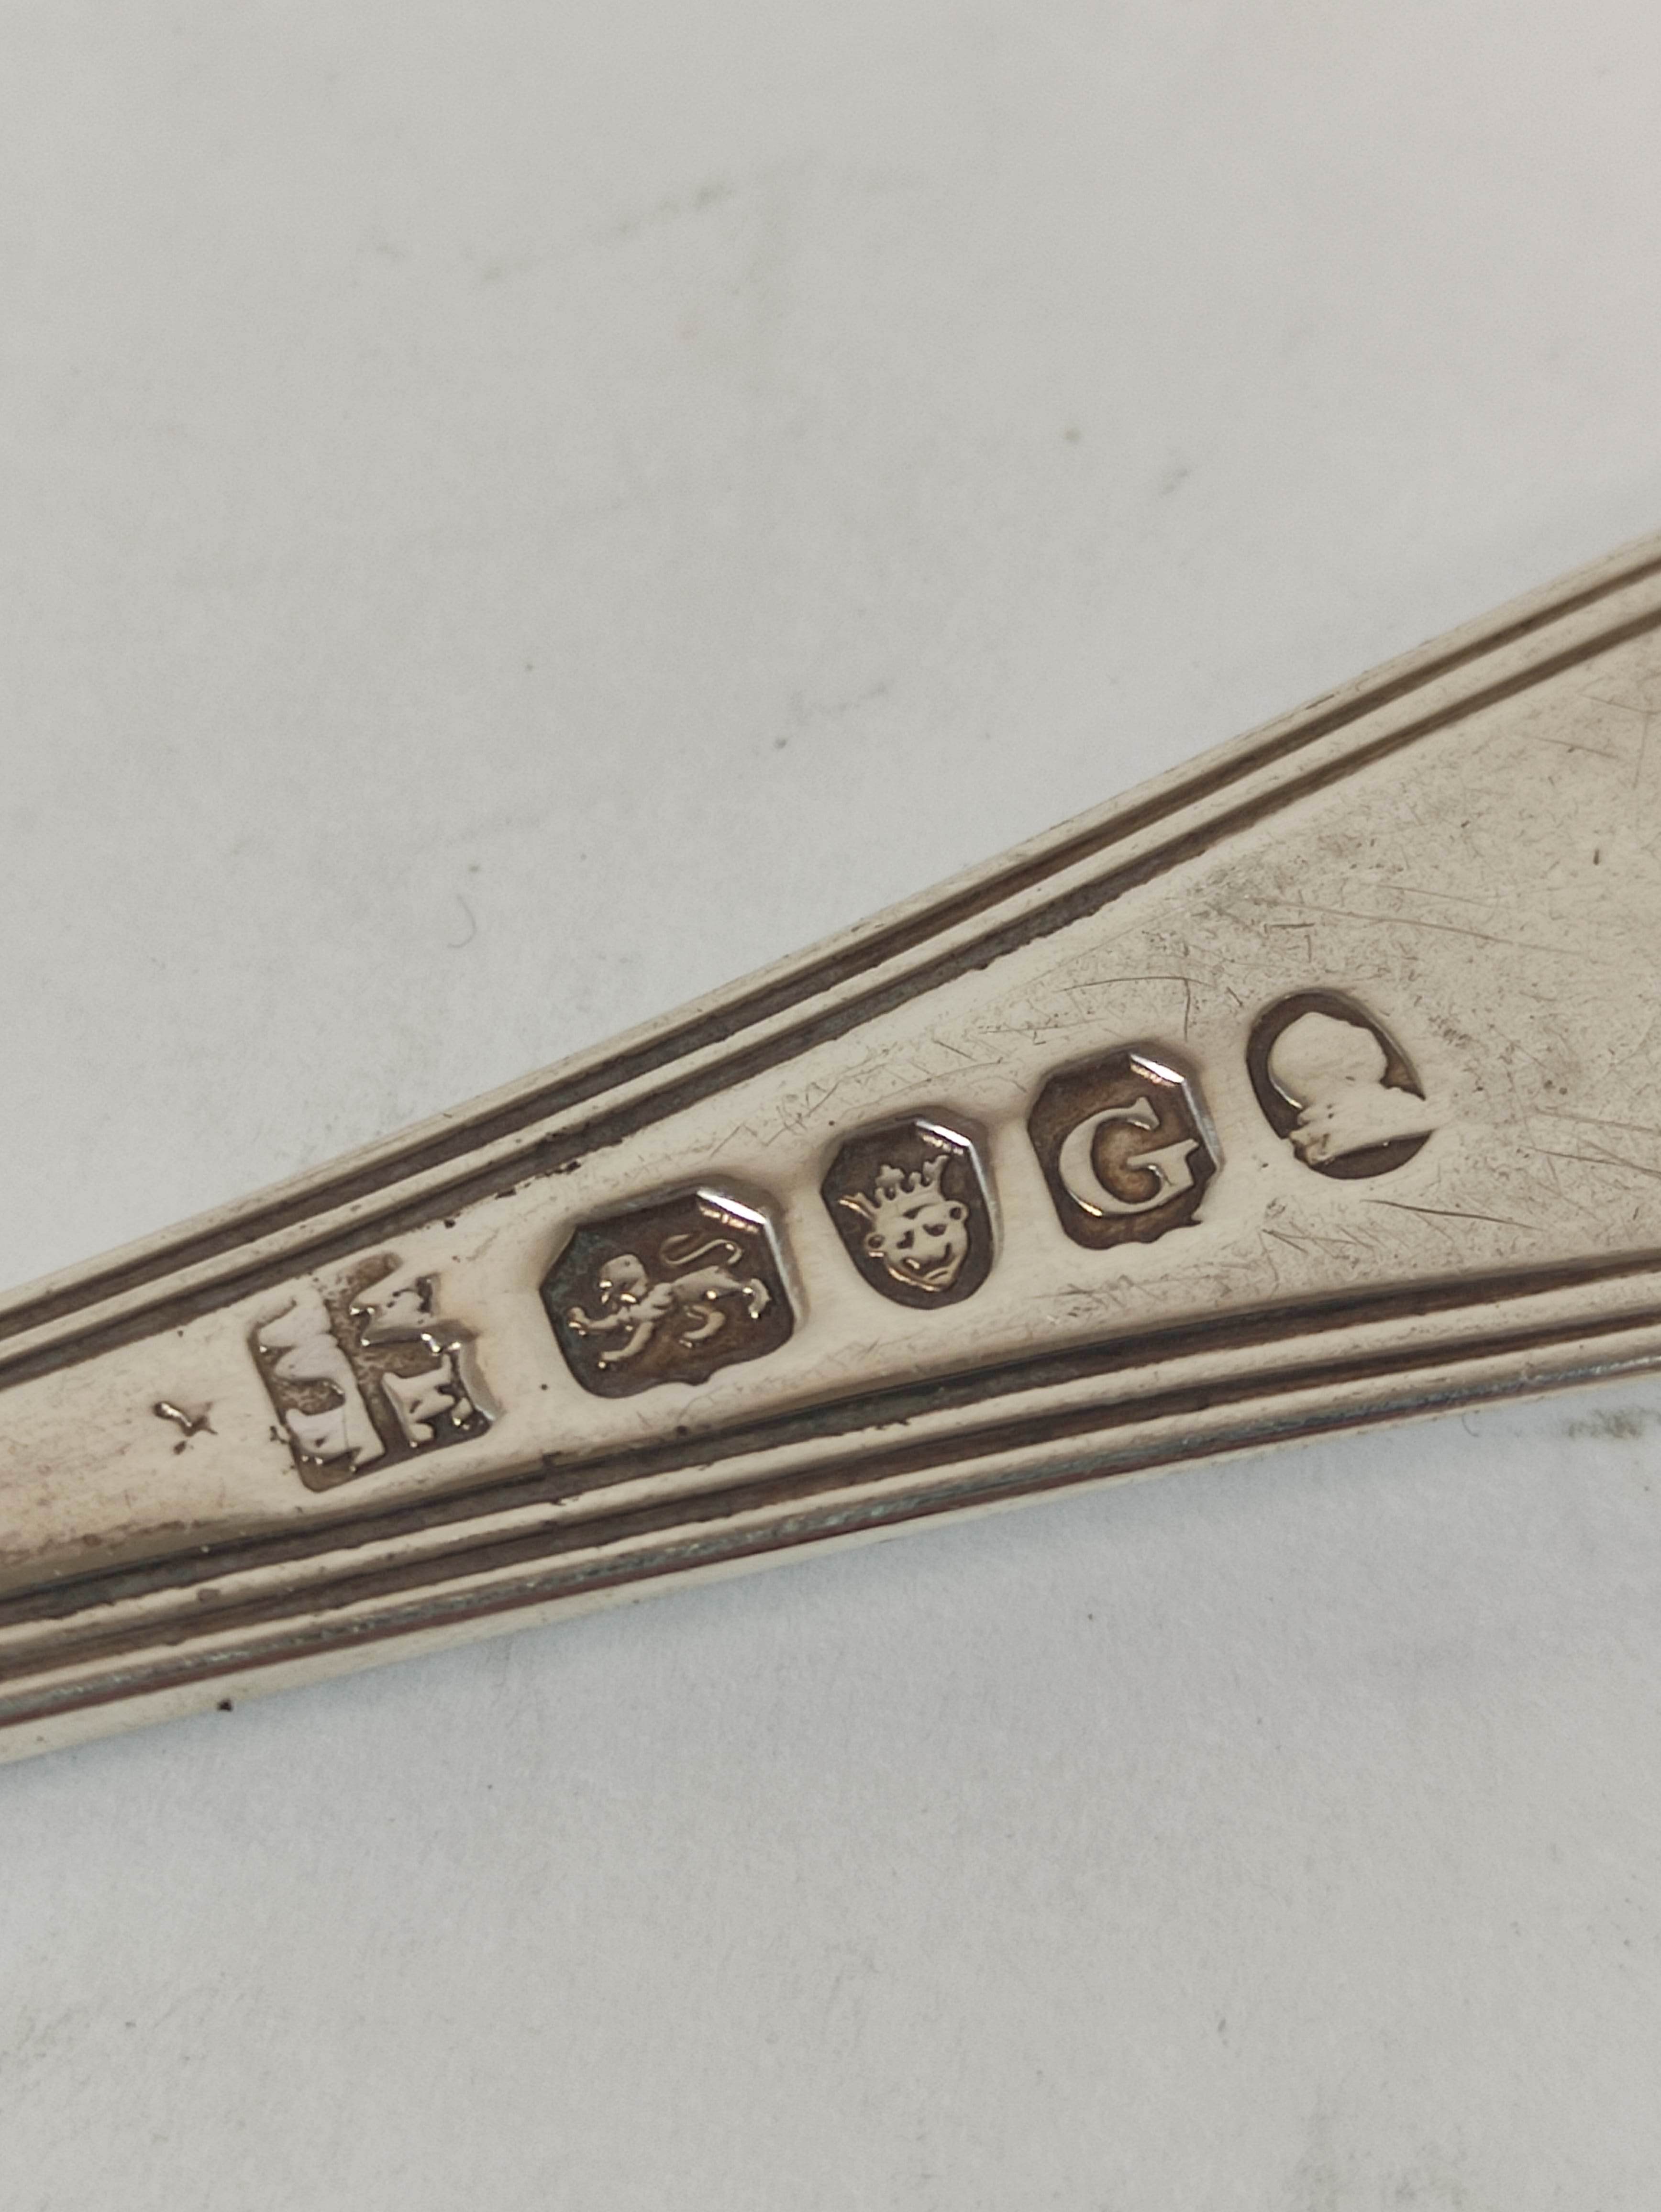 Service of thread pattern silver flatware, initialled J.K., mostly by Eley & Fearn, 1802, - Image 7 of 9